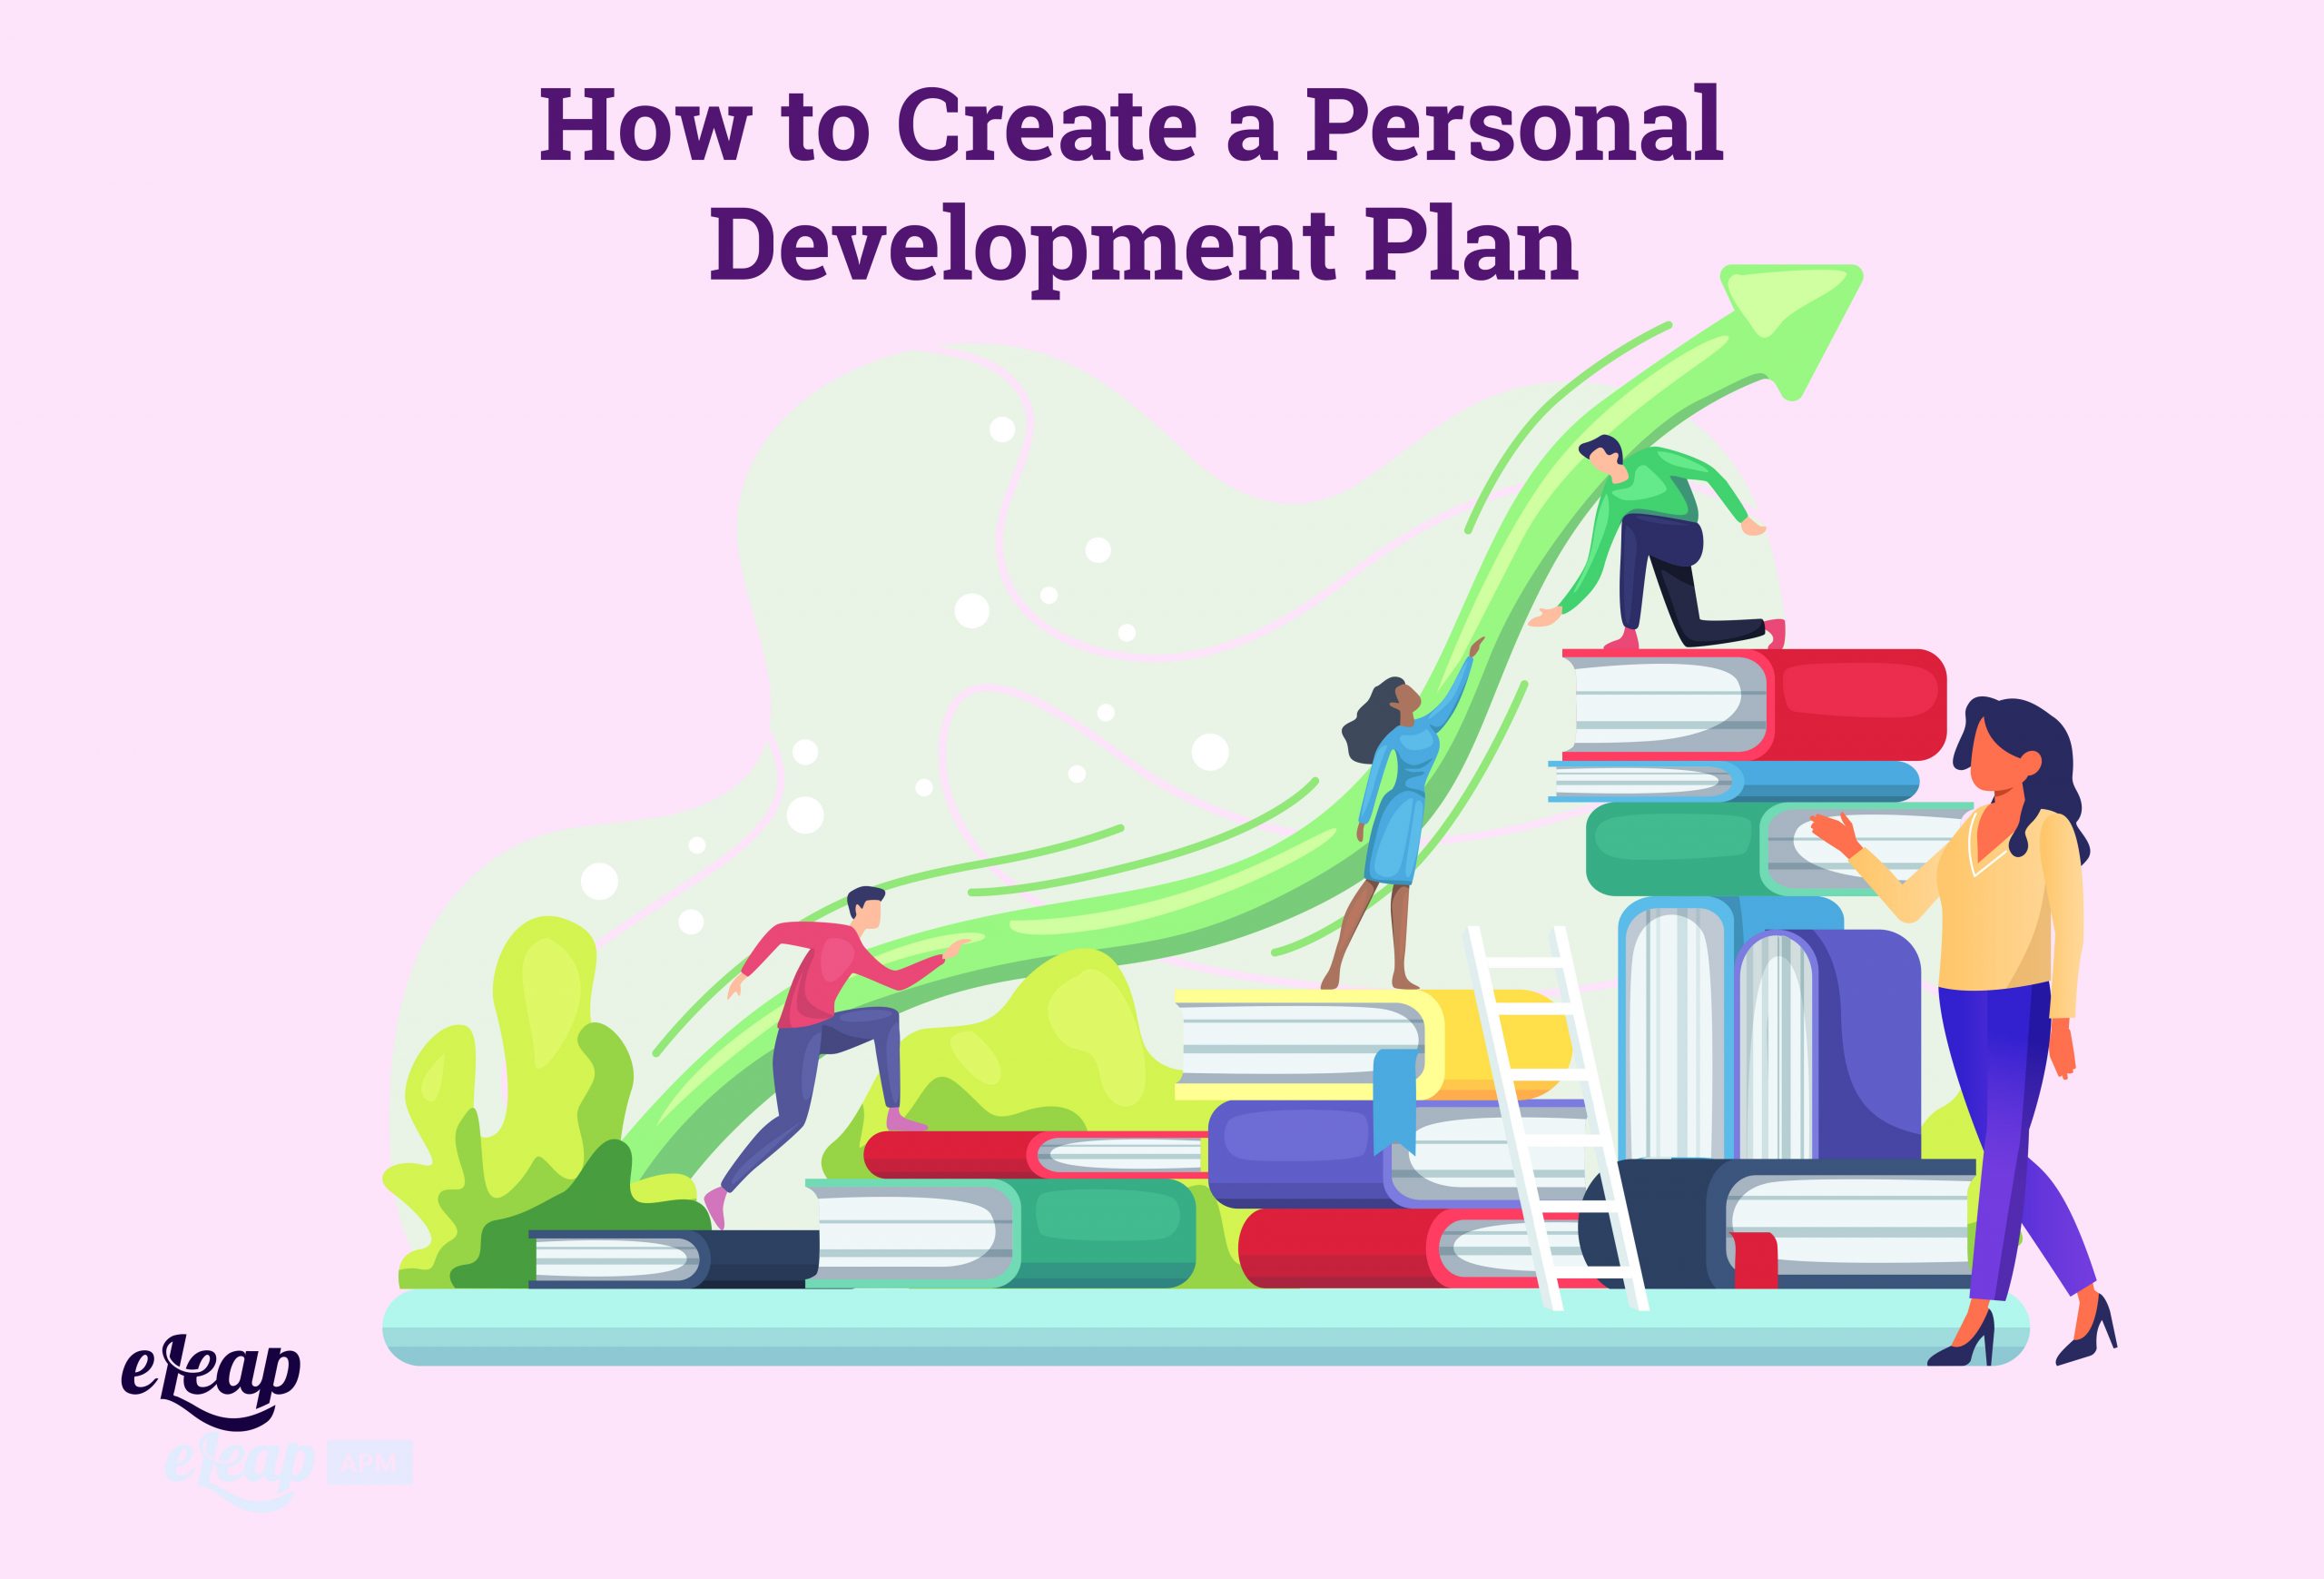 How to Create a Personal Development Plan